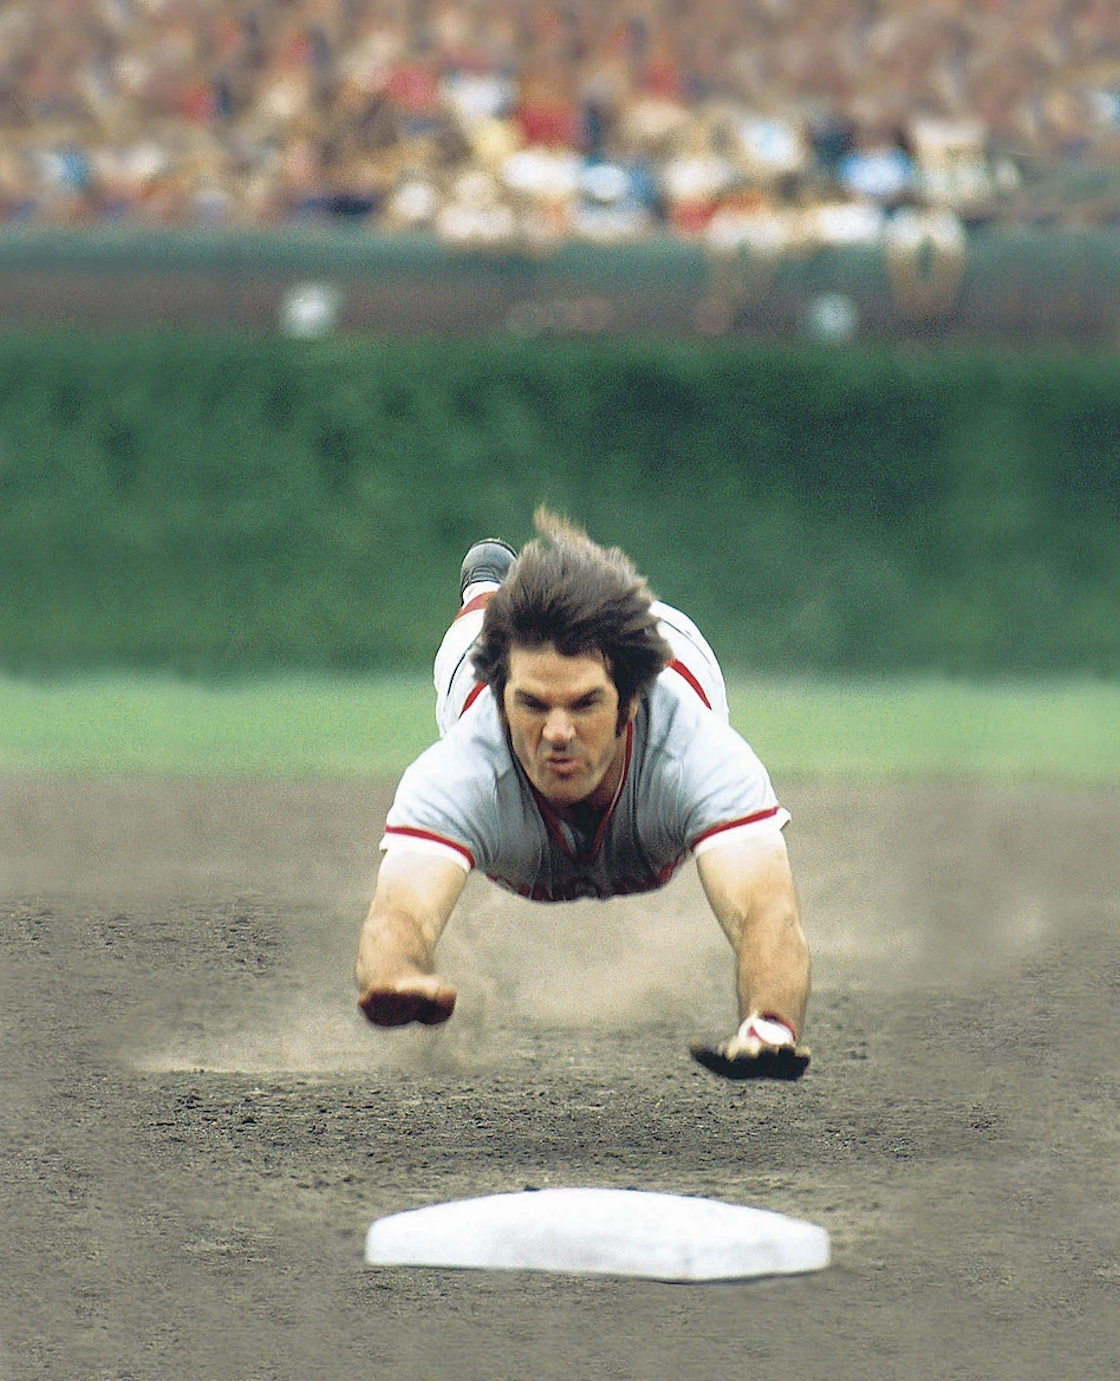 Most iconic fascinating sports photos - pete rose slide